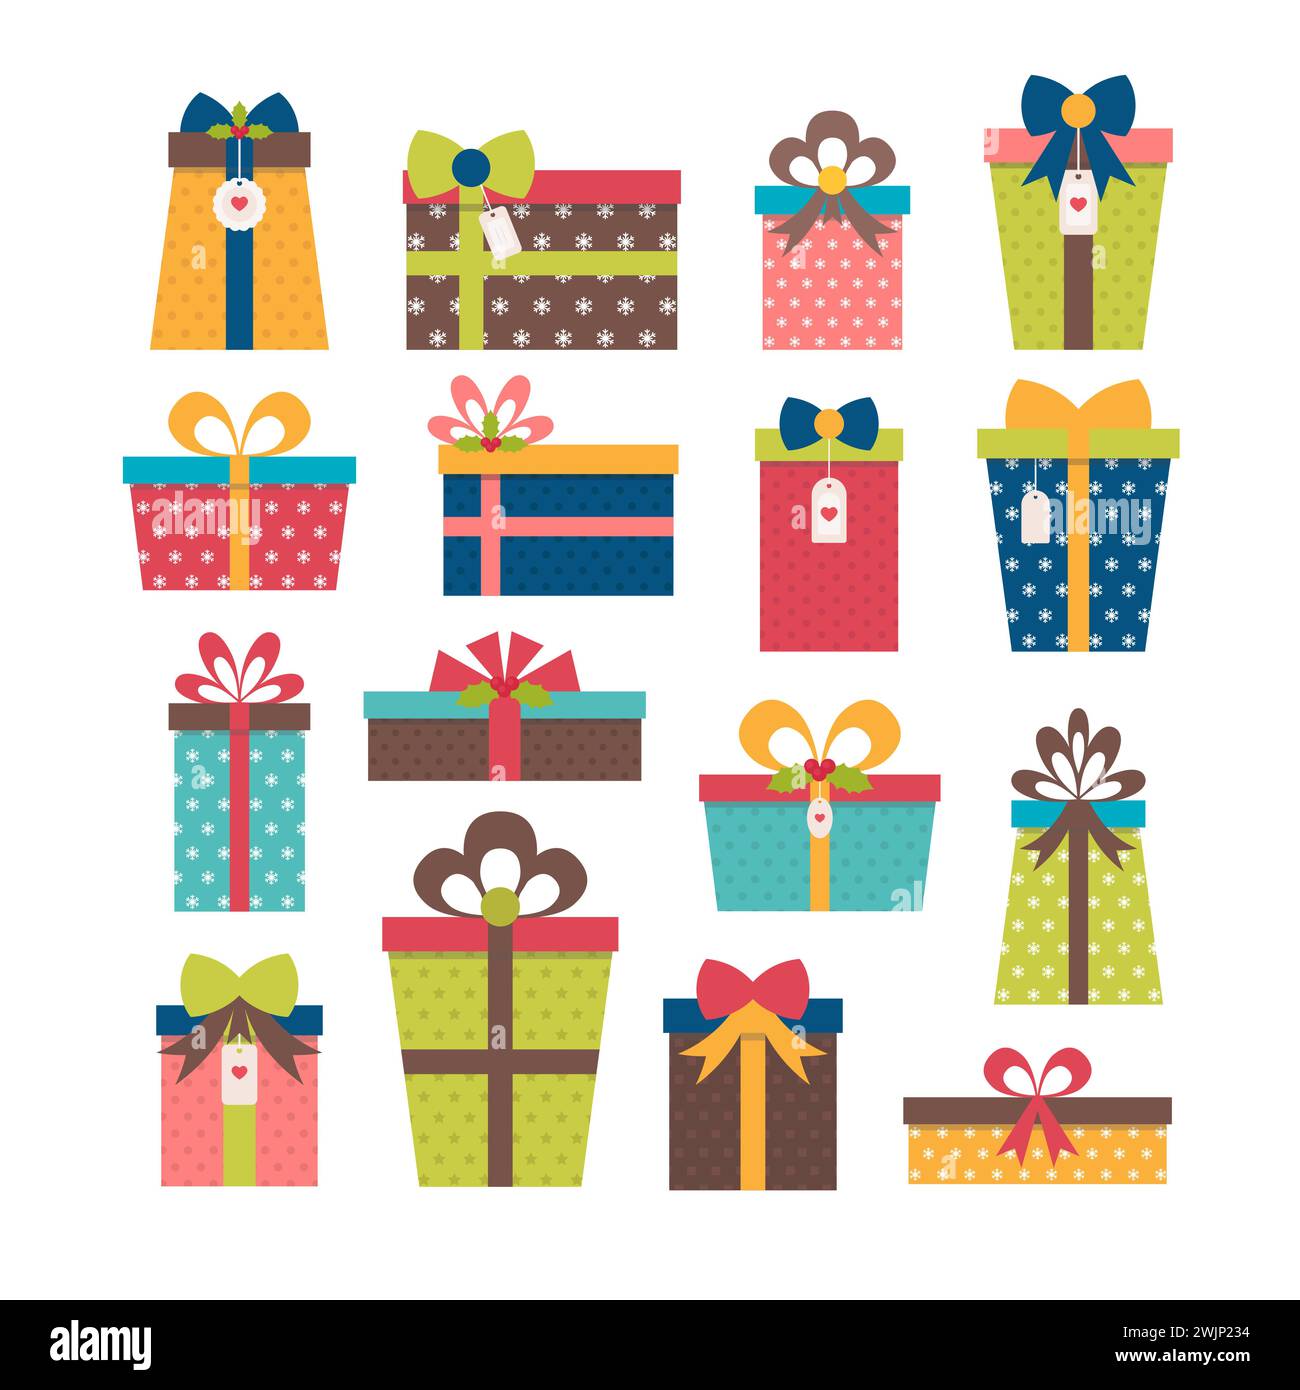 Set of different gift boxes. Colorful wrapped gift boxes. Birthday surprise. Christmas presents. Flat design. Vector illustration Stock Vector